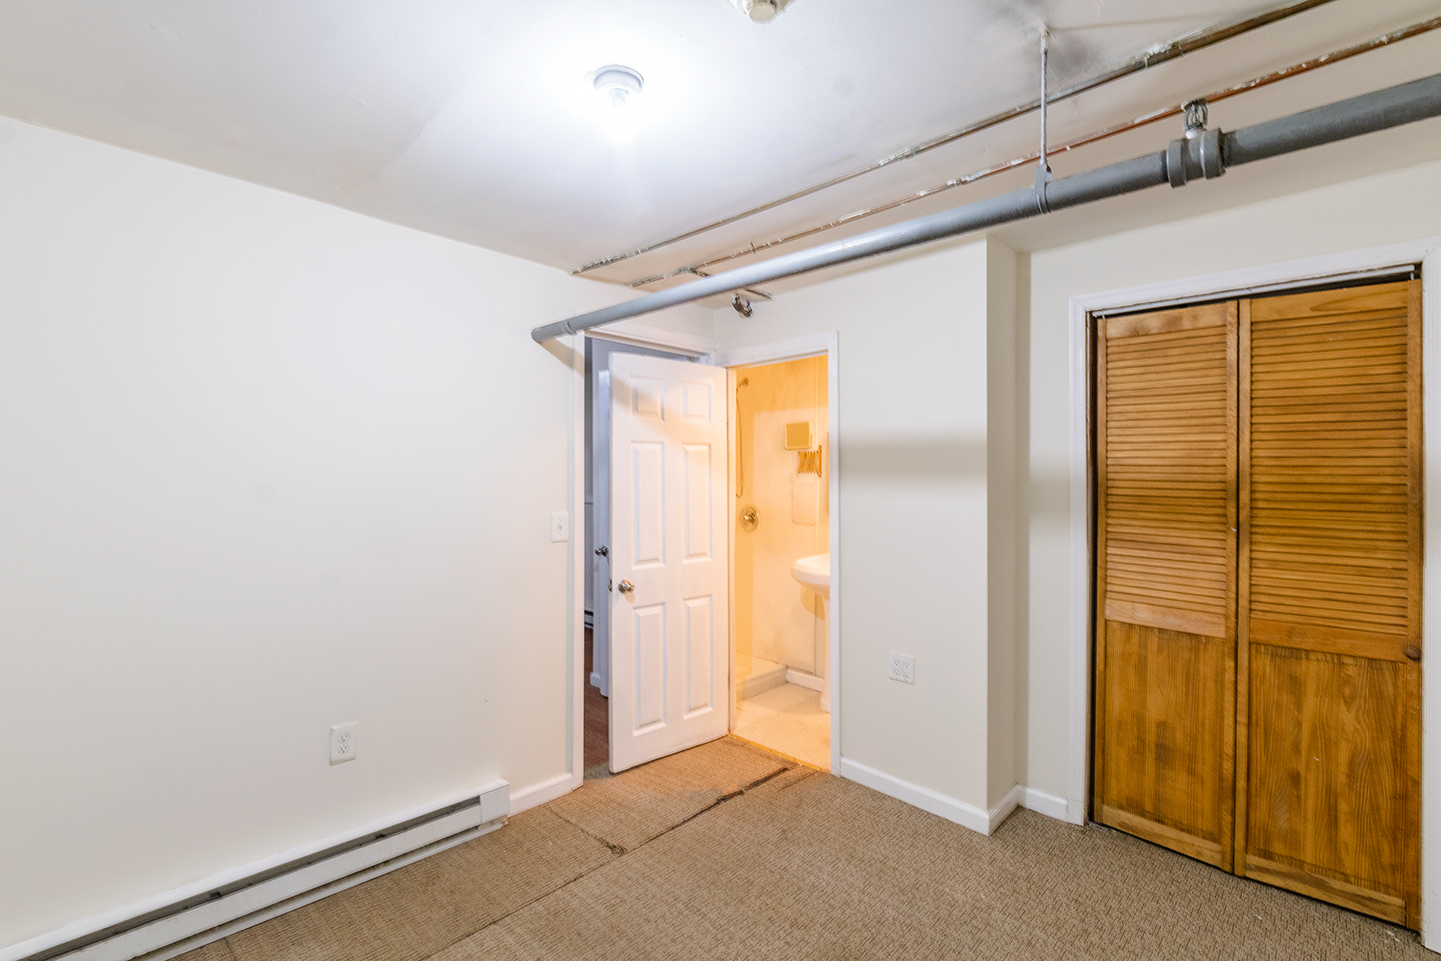 Property Photo For 1501 W. Allegheny Ave - Unit 8